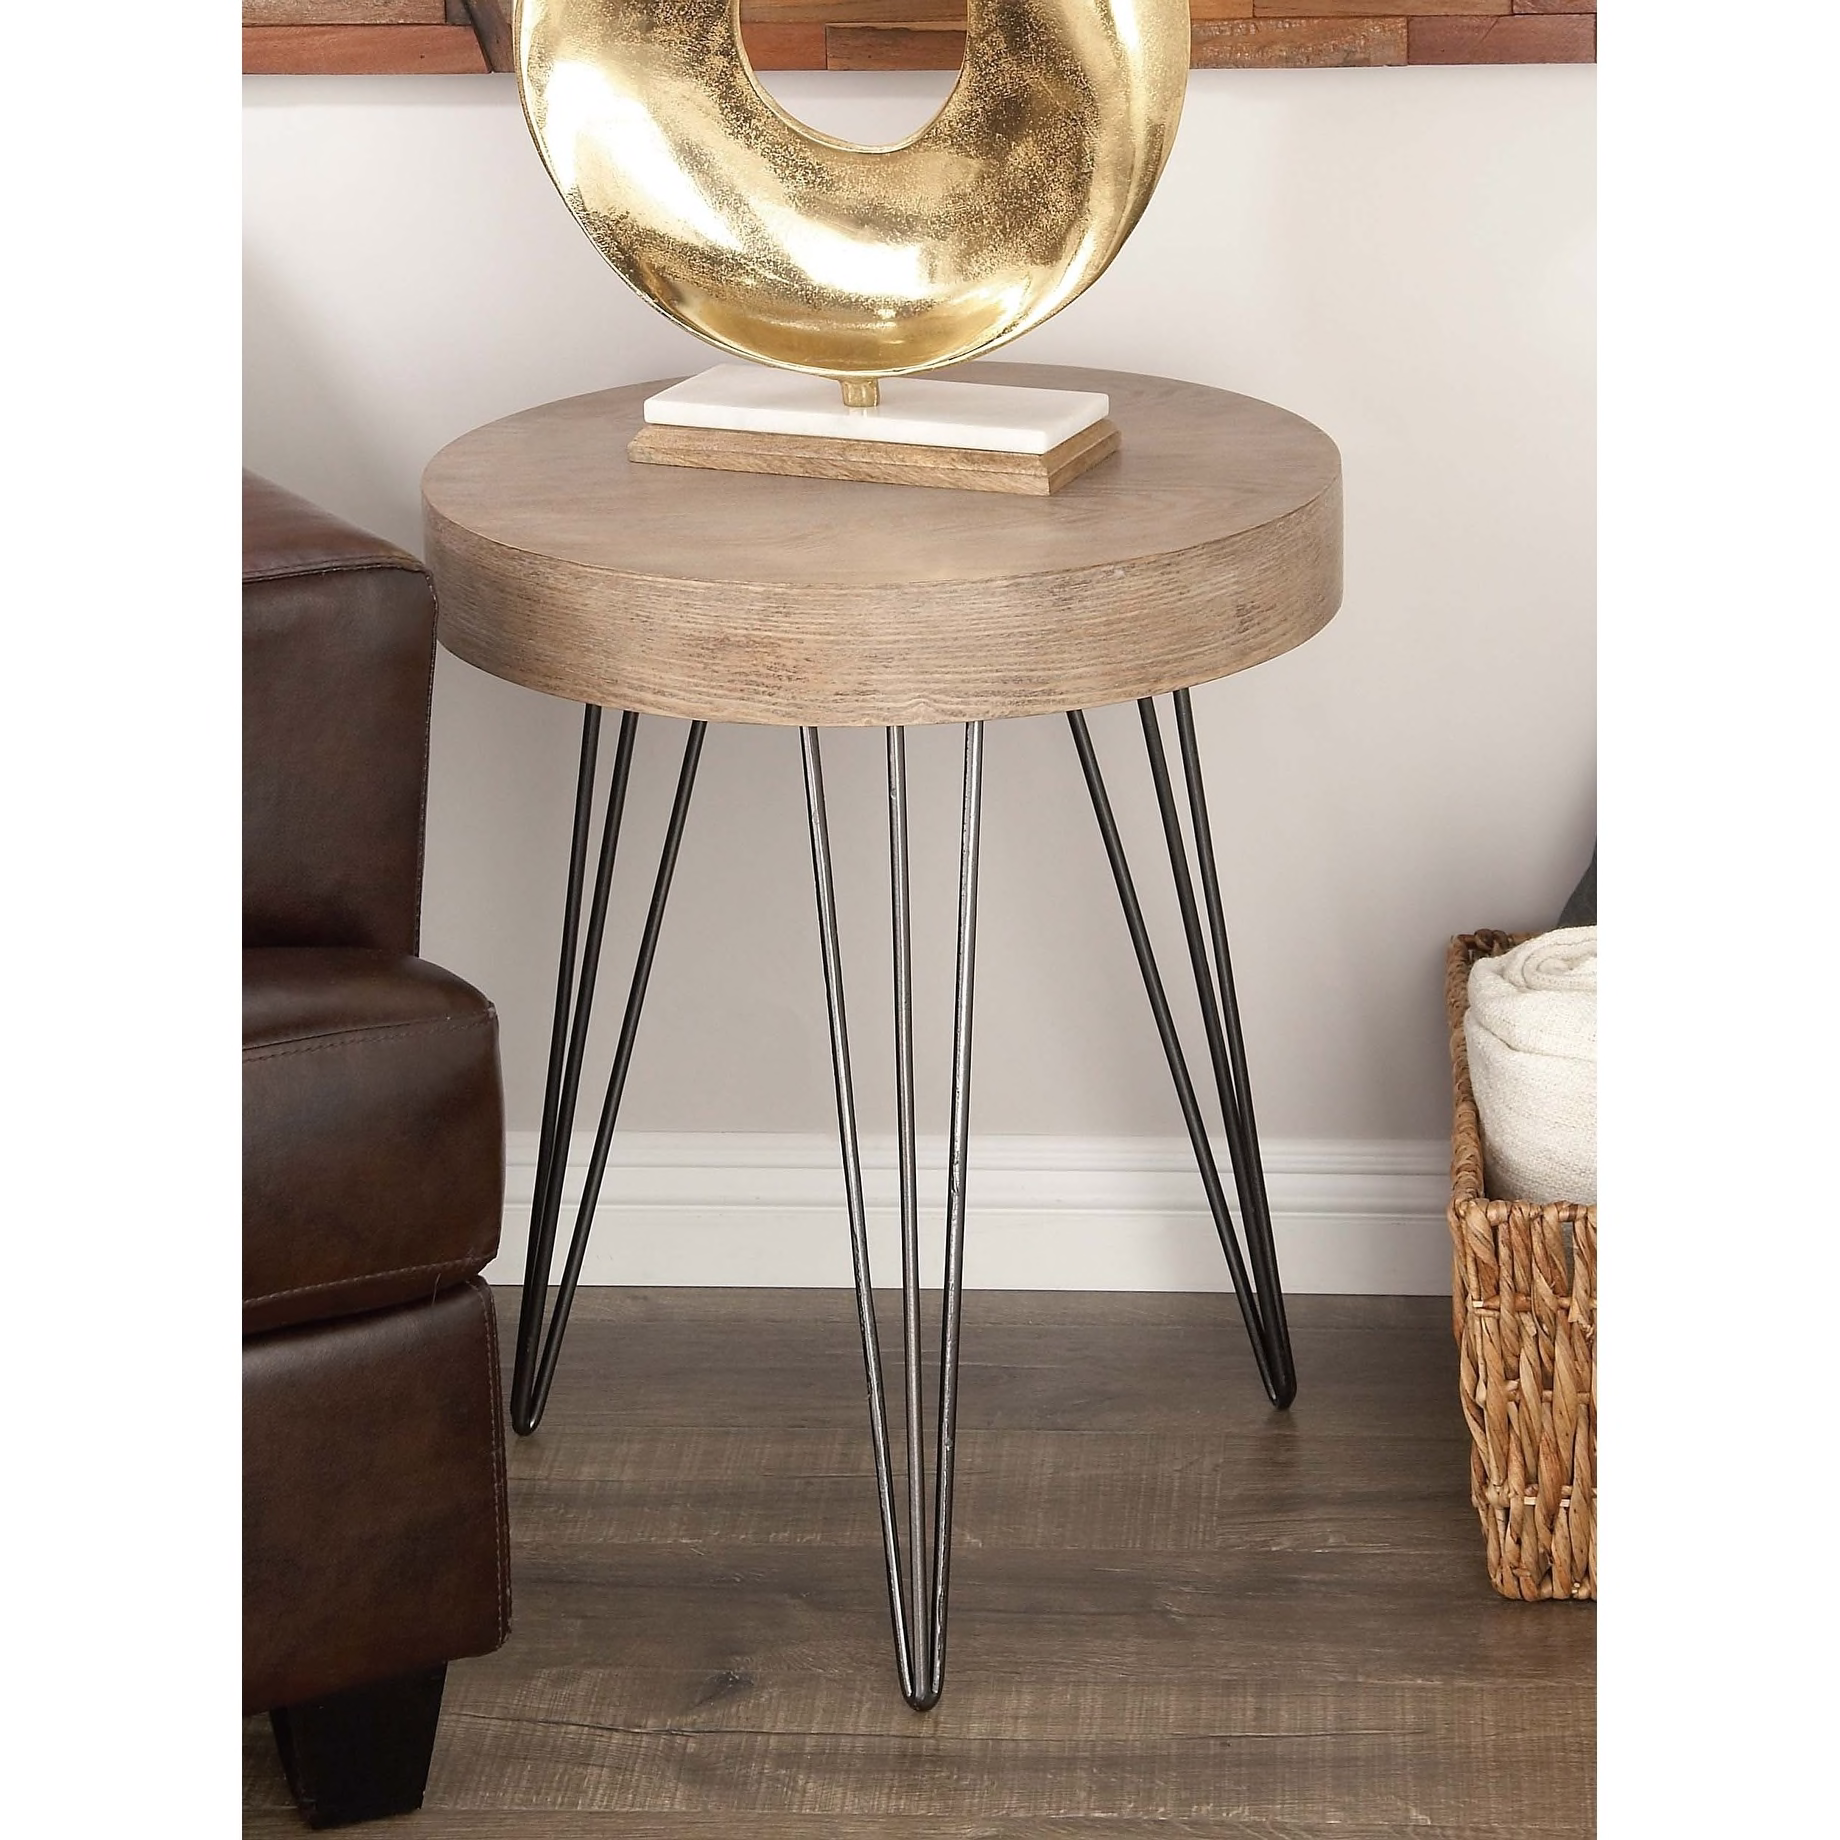 modern inch wood and iron round accent table studio with screw legs free shipping today small white end crystal lamp diy desk sea themed shades unfinished tops pieces pottery barn